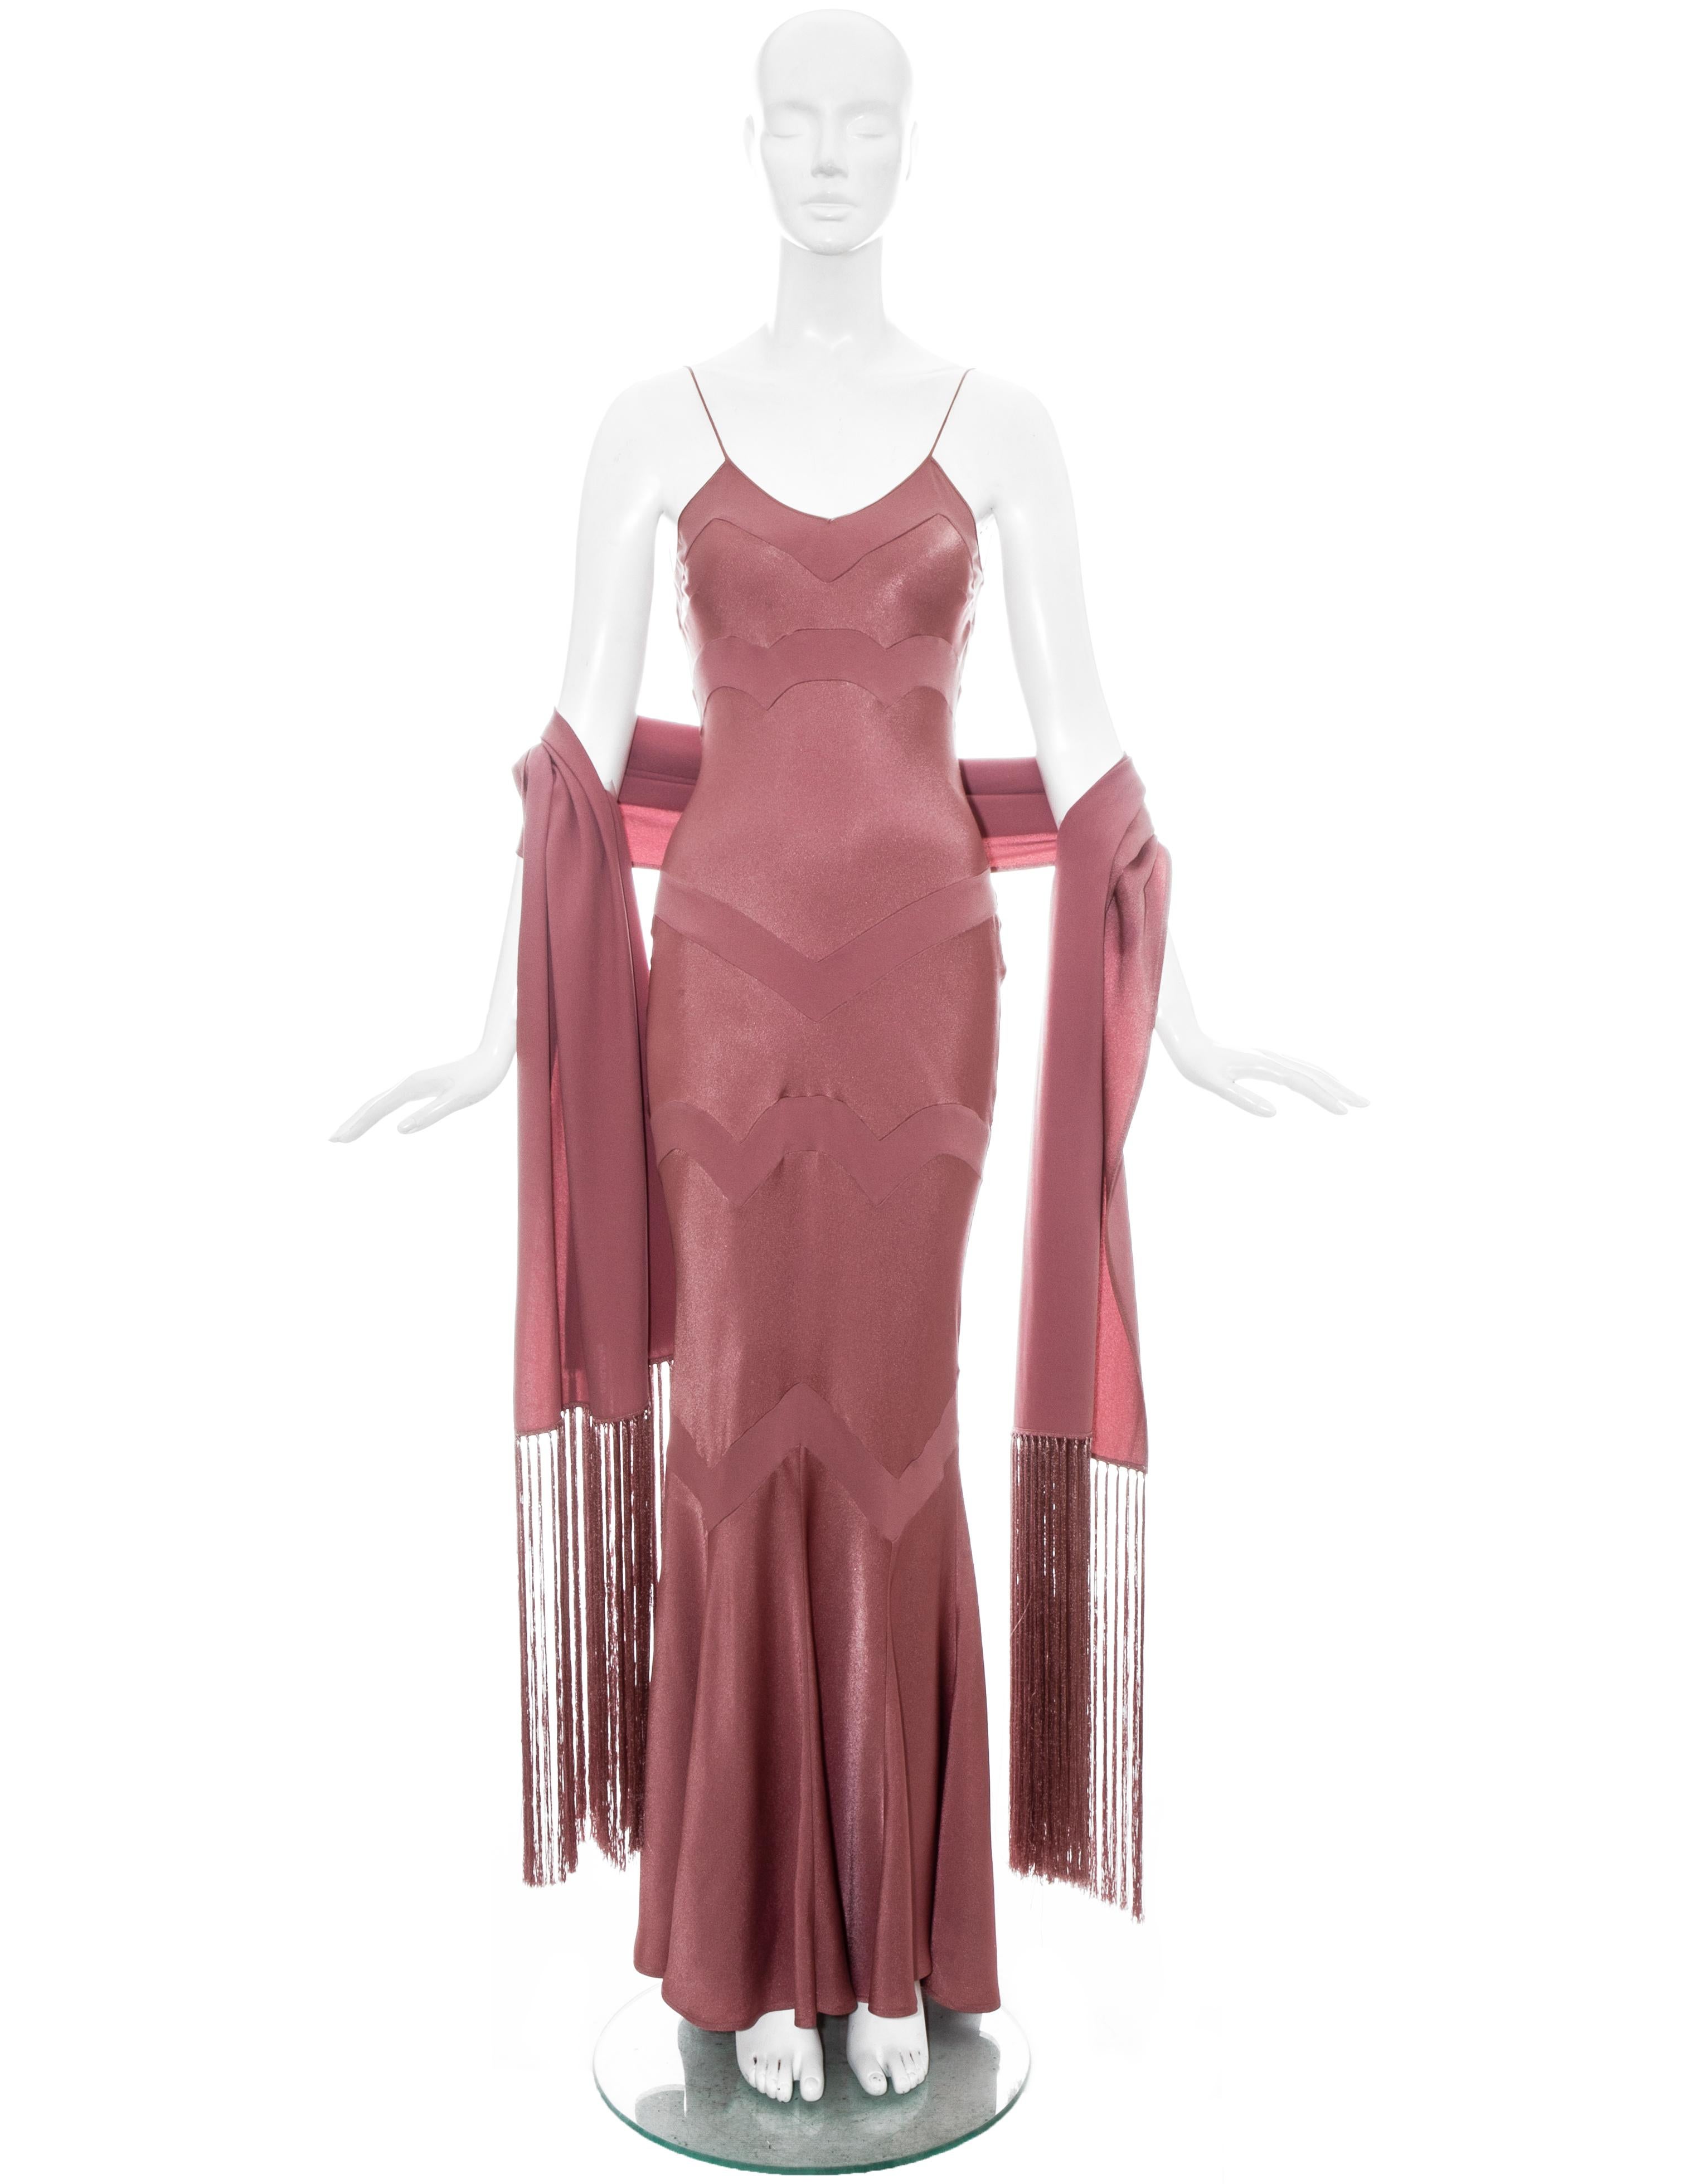 John Galliano pink satin evening dress with spaghetti straps and multiple bias-cut panels; sold with matching tasseled shawl.

Spring-Summer 2002